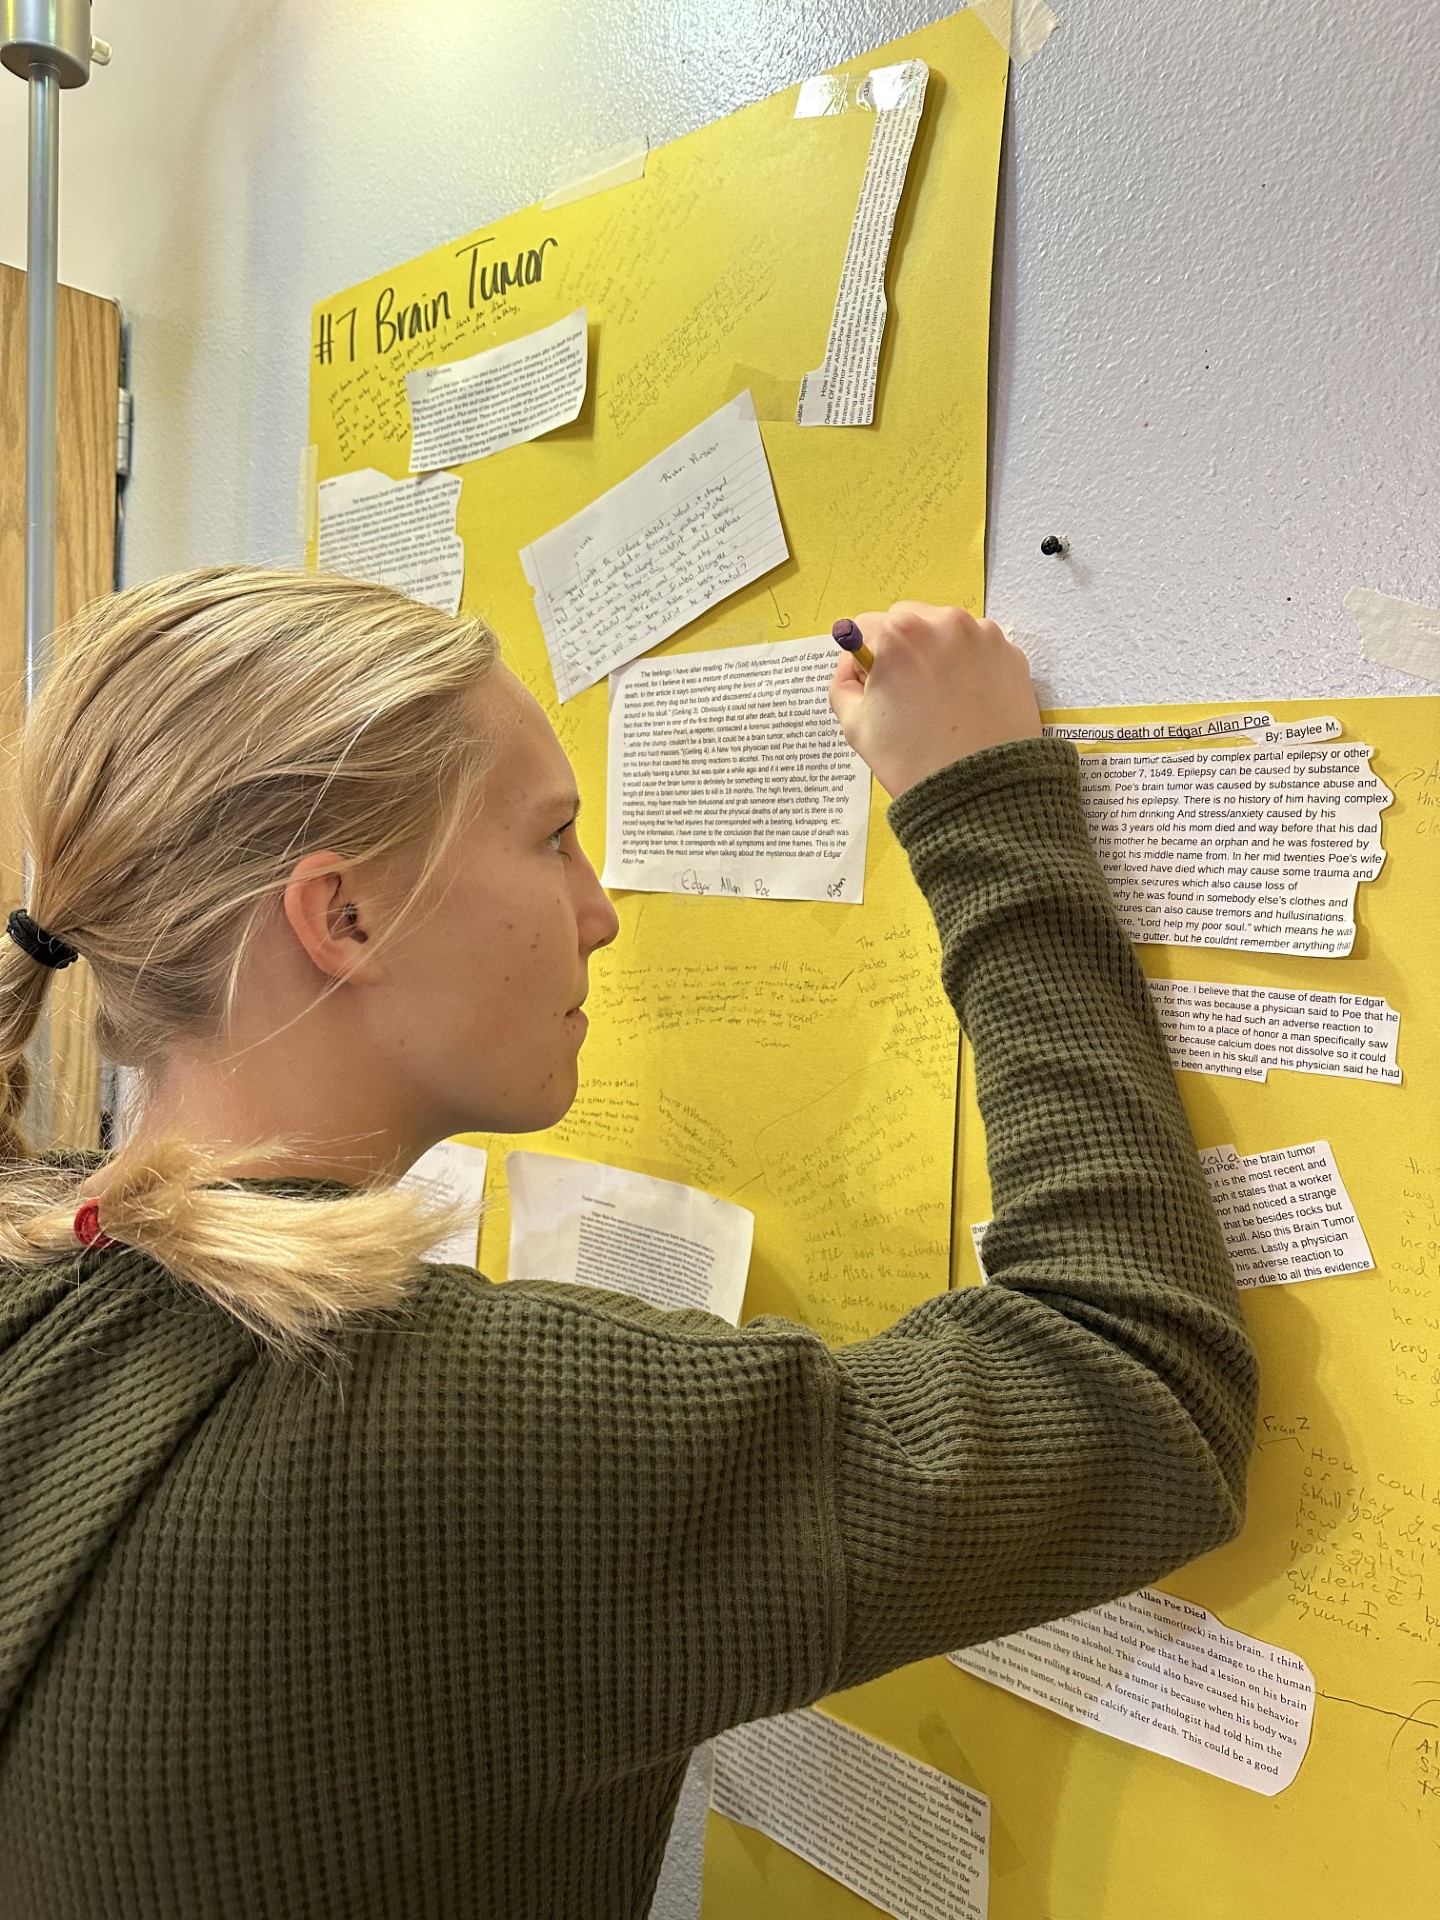 Middle School English student writing paragraph arguments on poster placed on wall